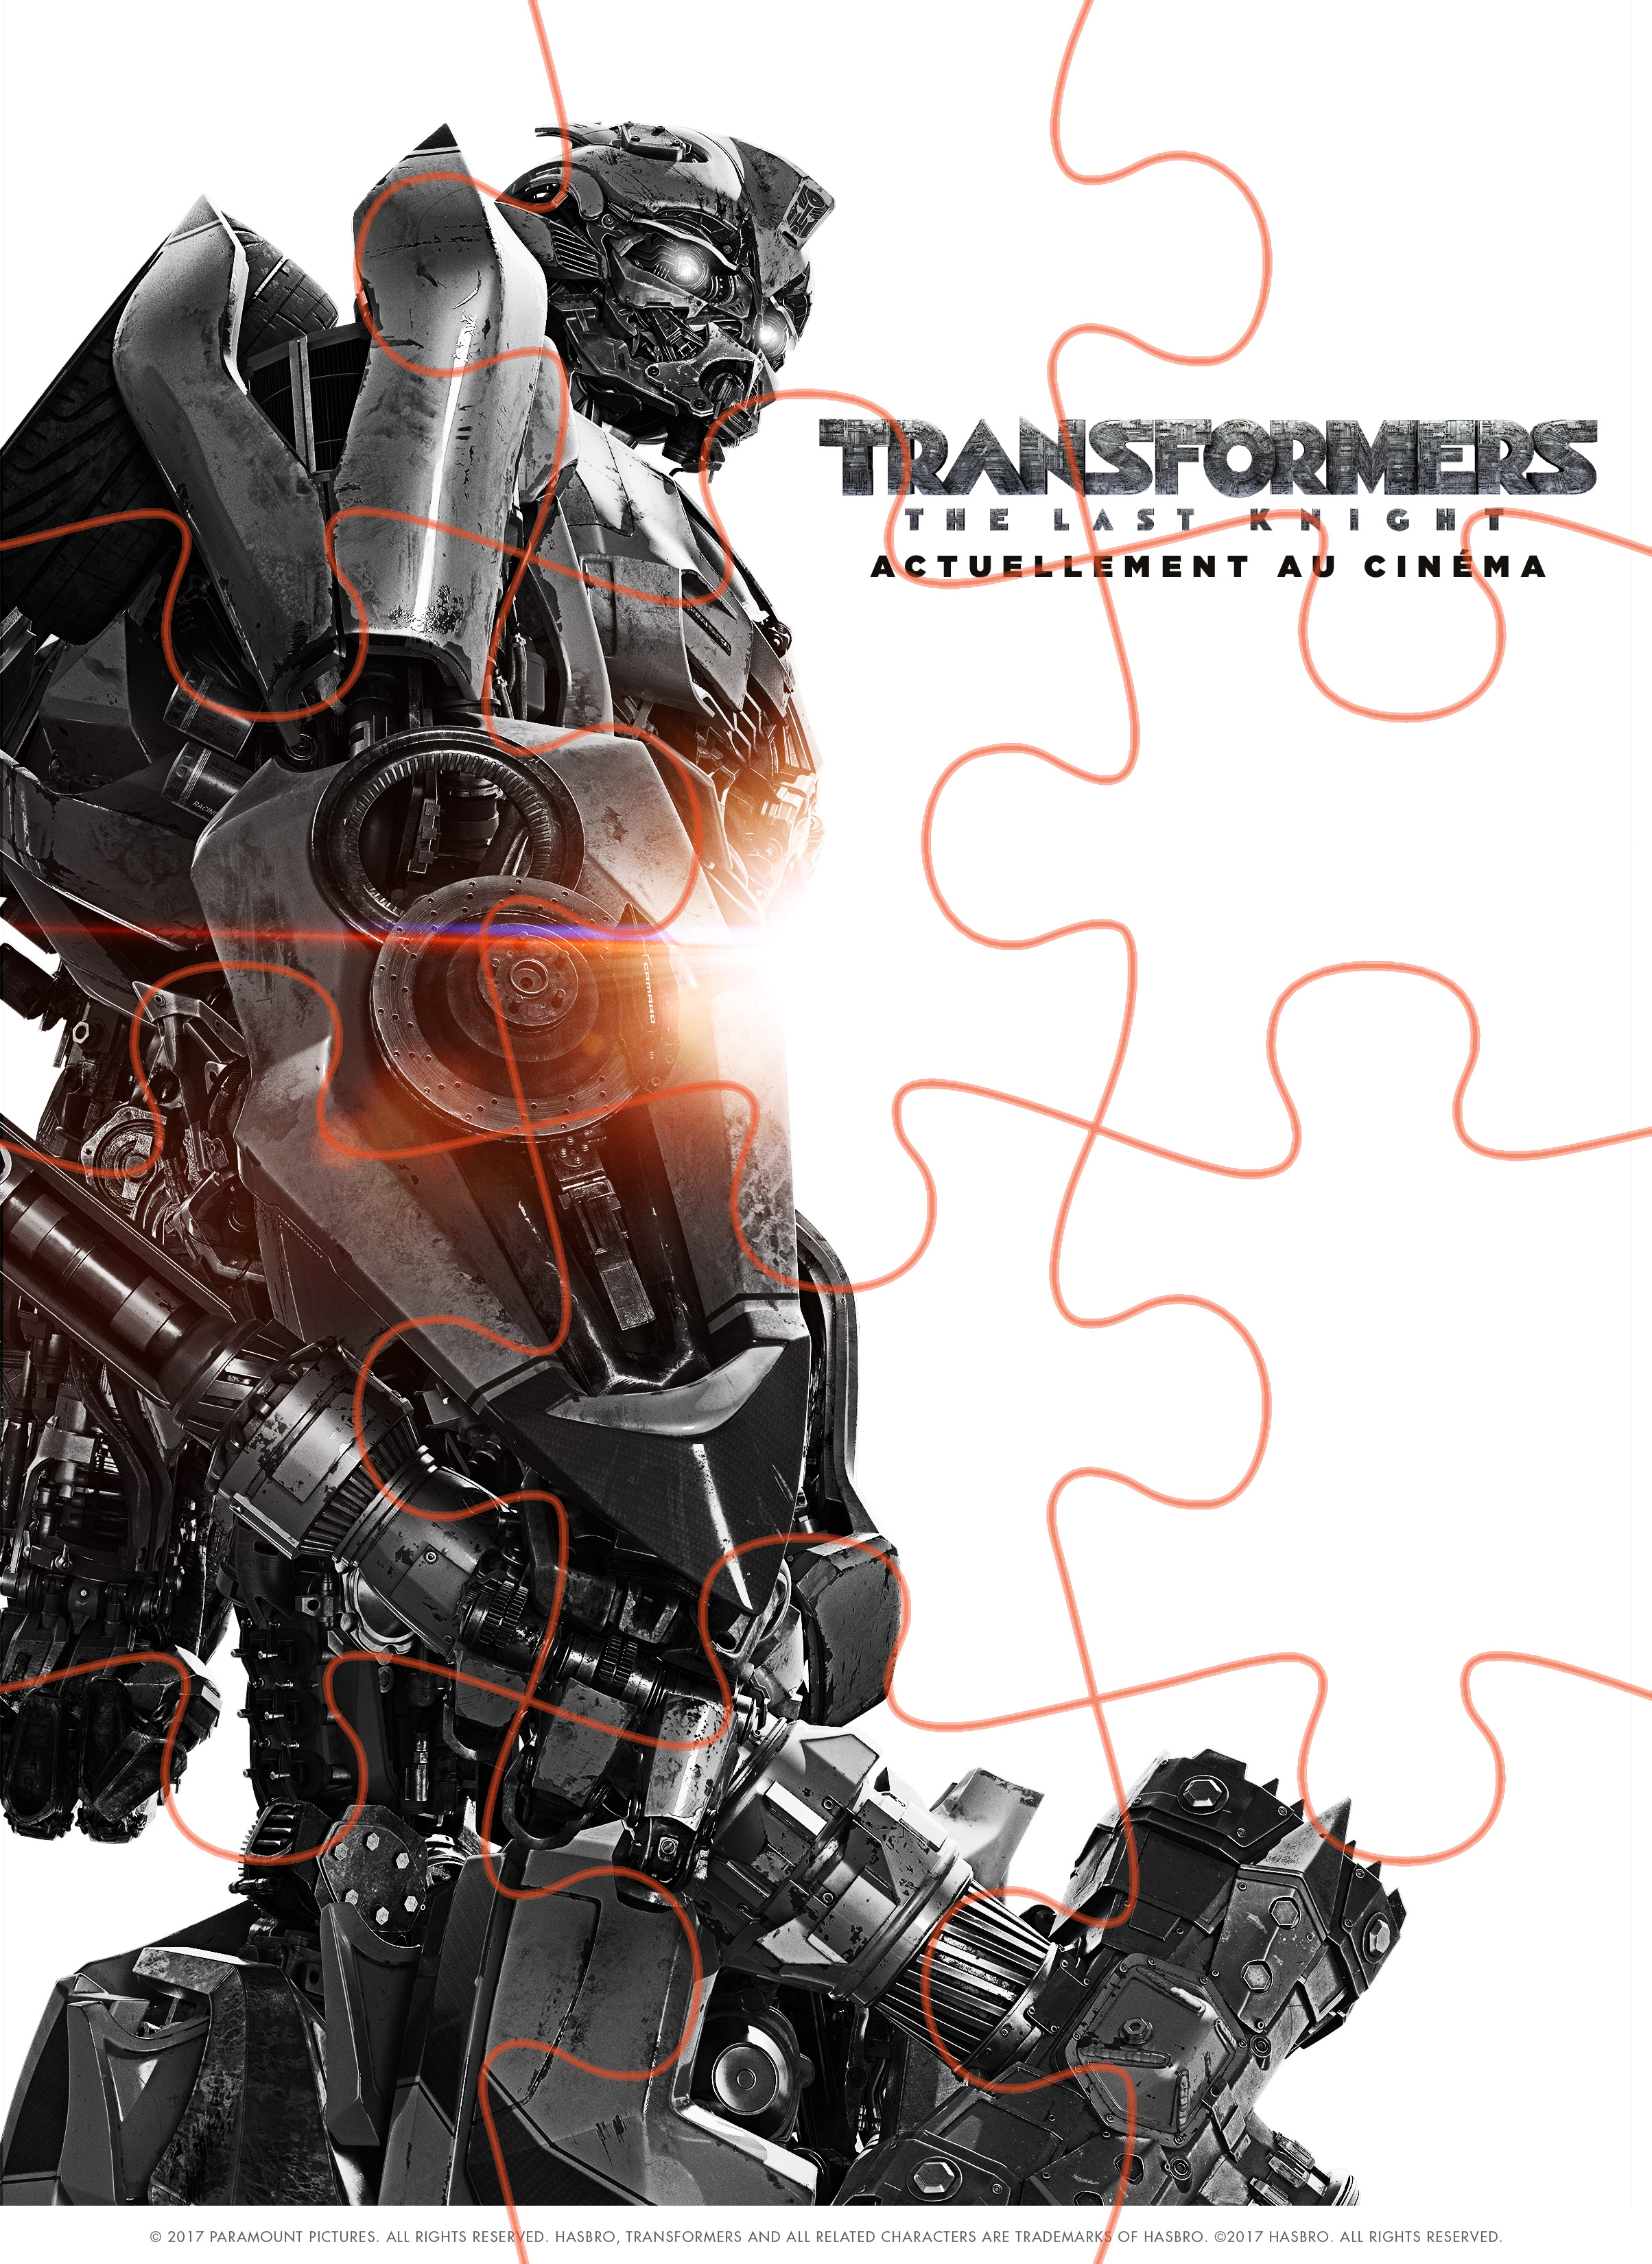 Transformers Puzzle 1 online game